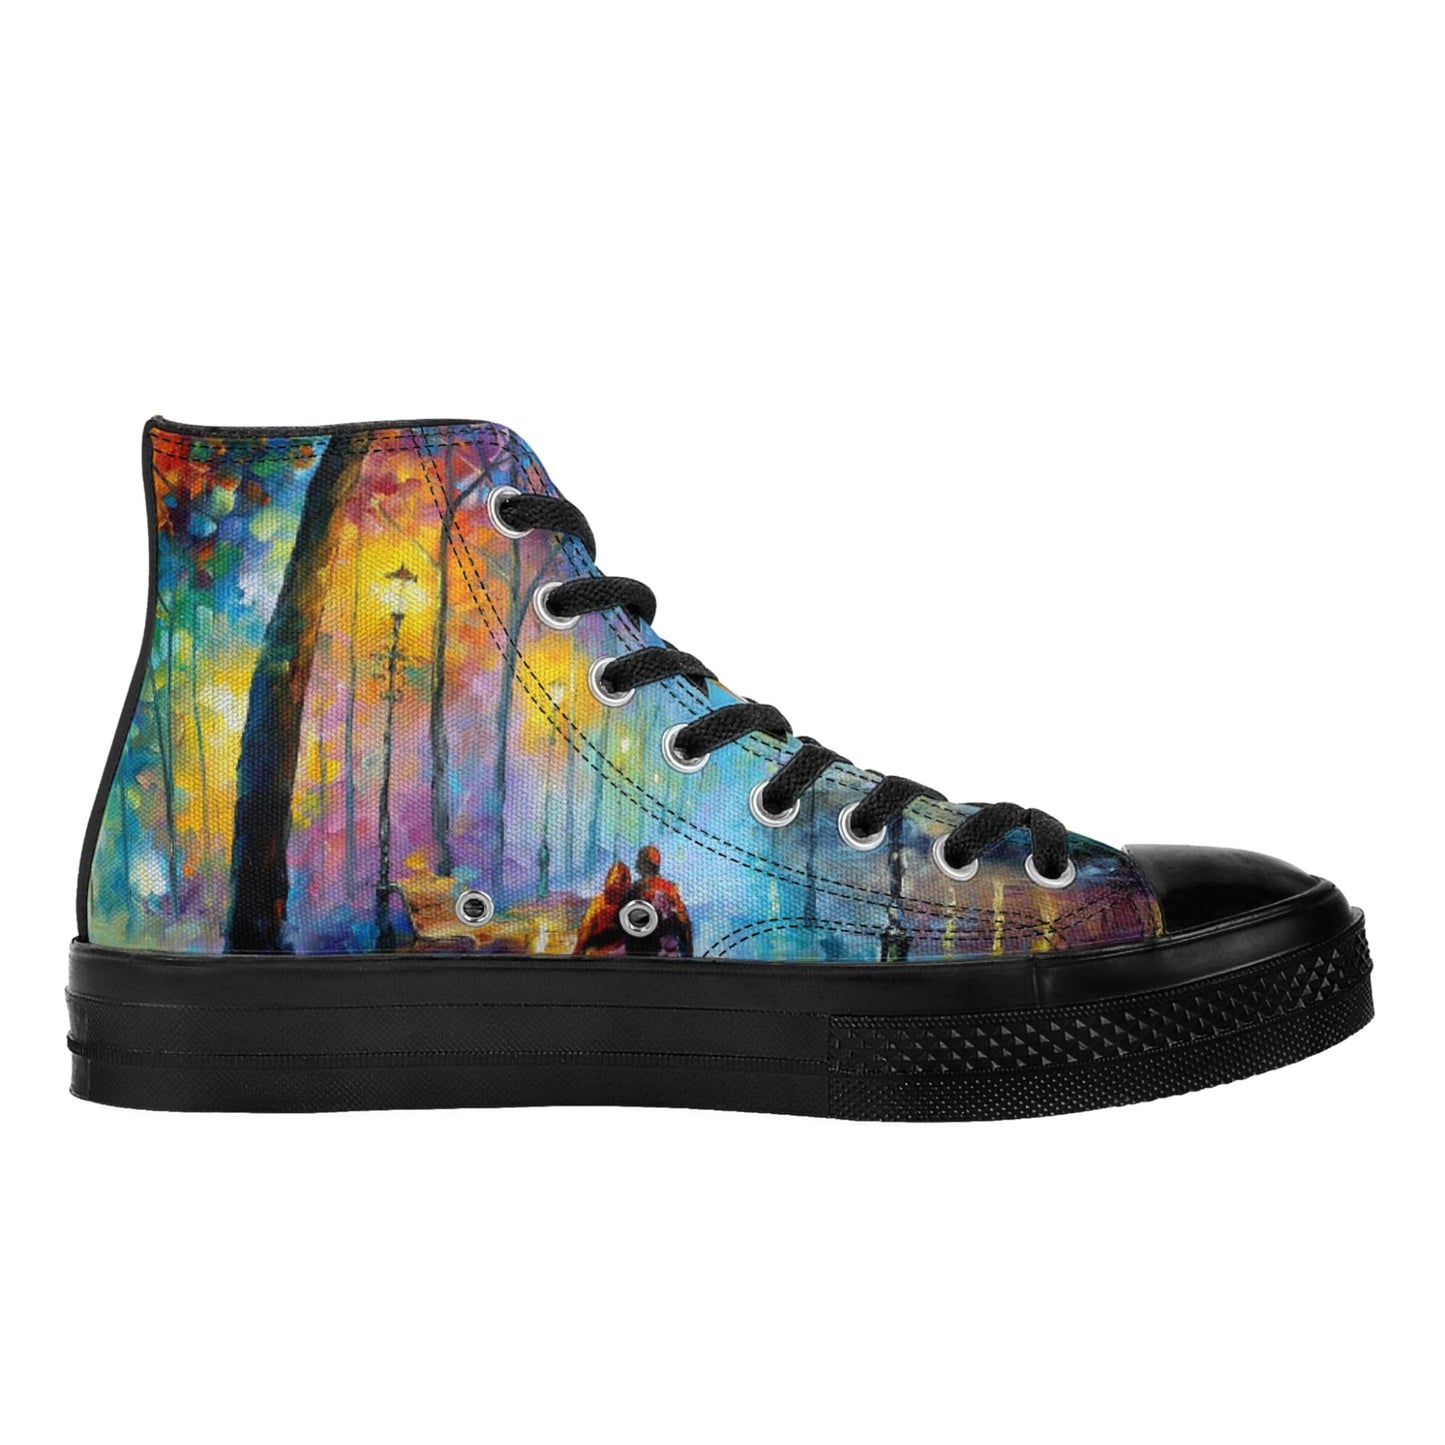 Women's Classic Black High Top Canvas Shoes Afremov Melody of The Night